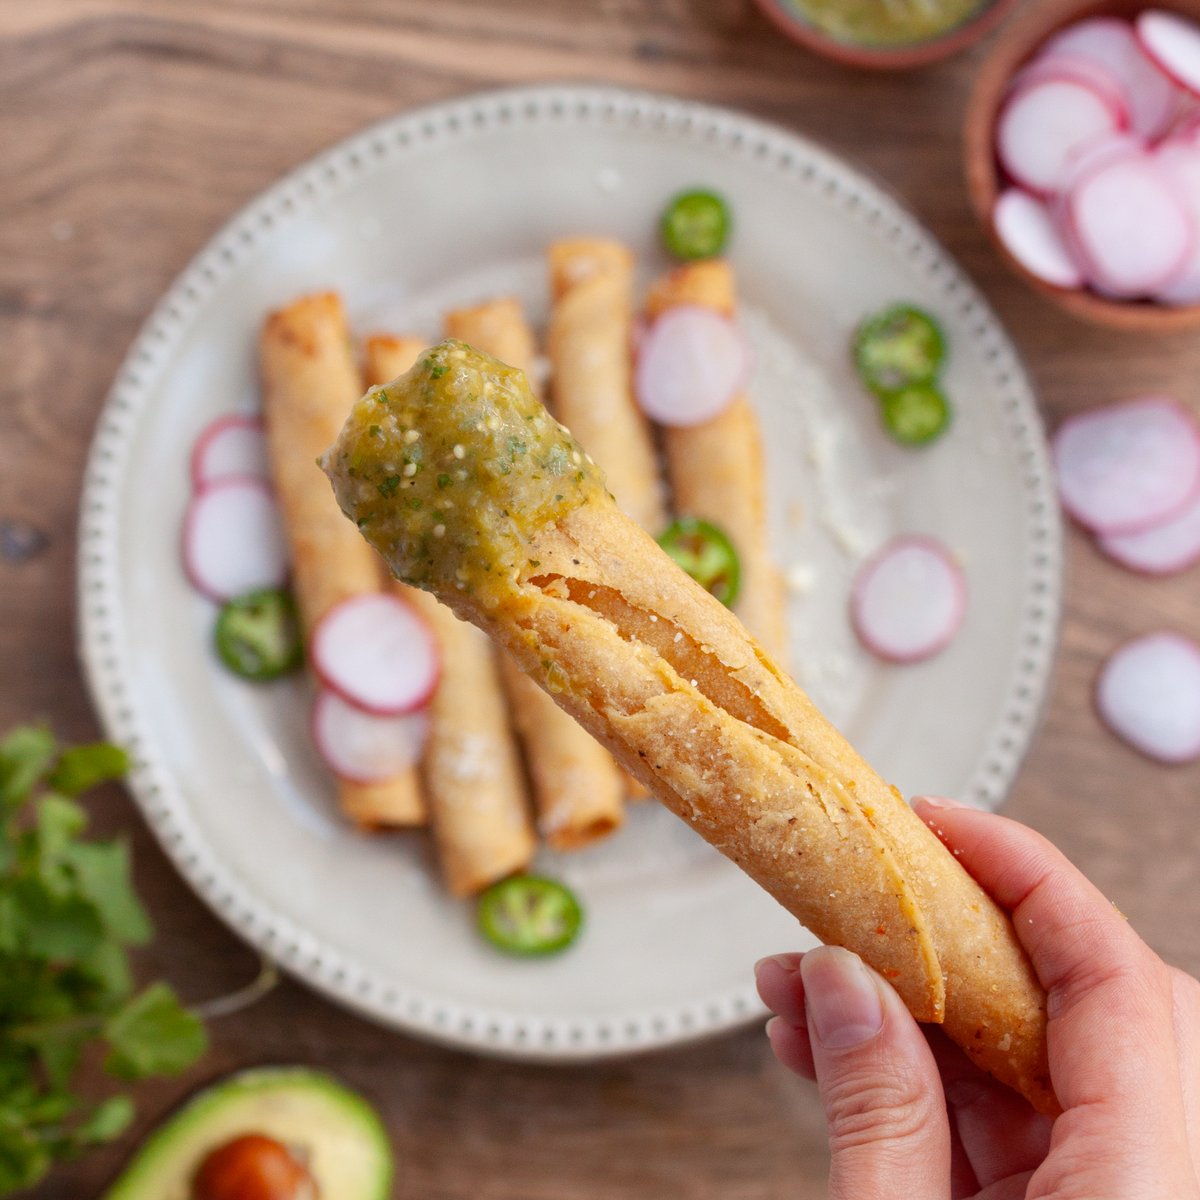 Embrace Spring with a decadently gorgeous plate of taquitos! Order now through Thrive Market or Instacart to fulfill your Starlite cravings. 😋💚 

#platedperfection #plantbased #veganfoodie #veganrecipes #taquitos #vegancommunity